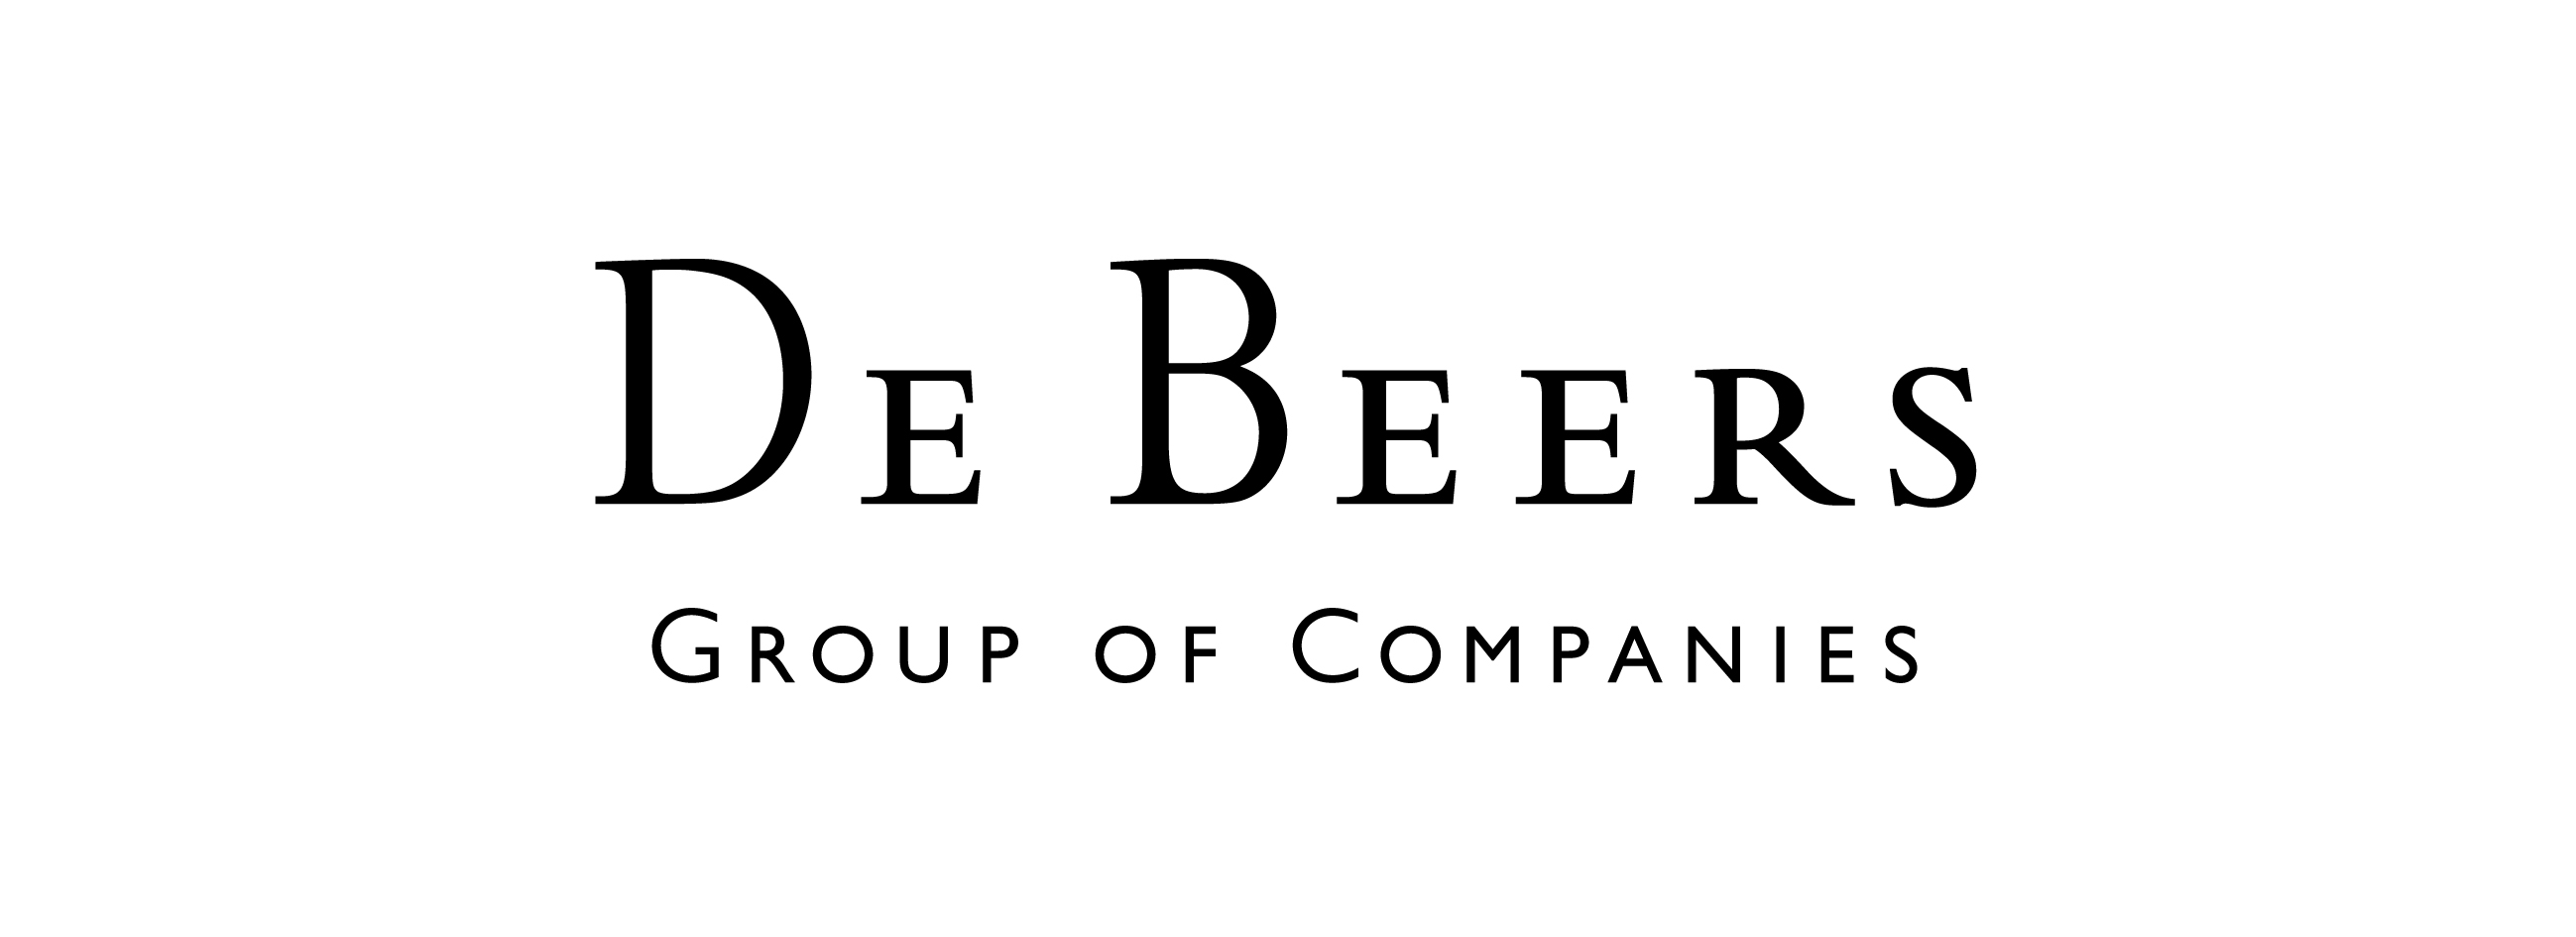 Carbon neutral mining research at De Beers